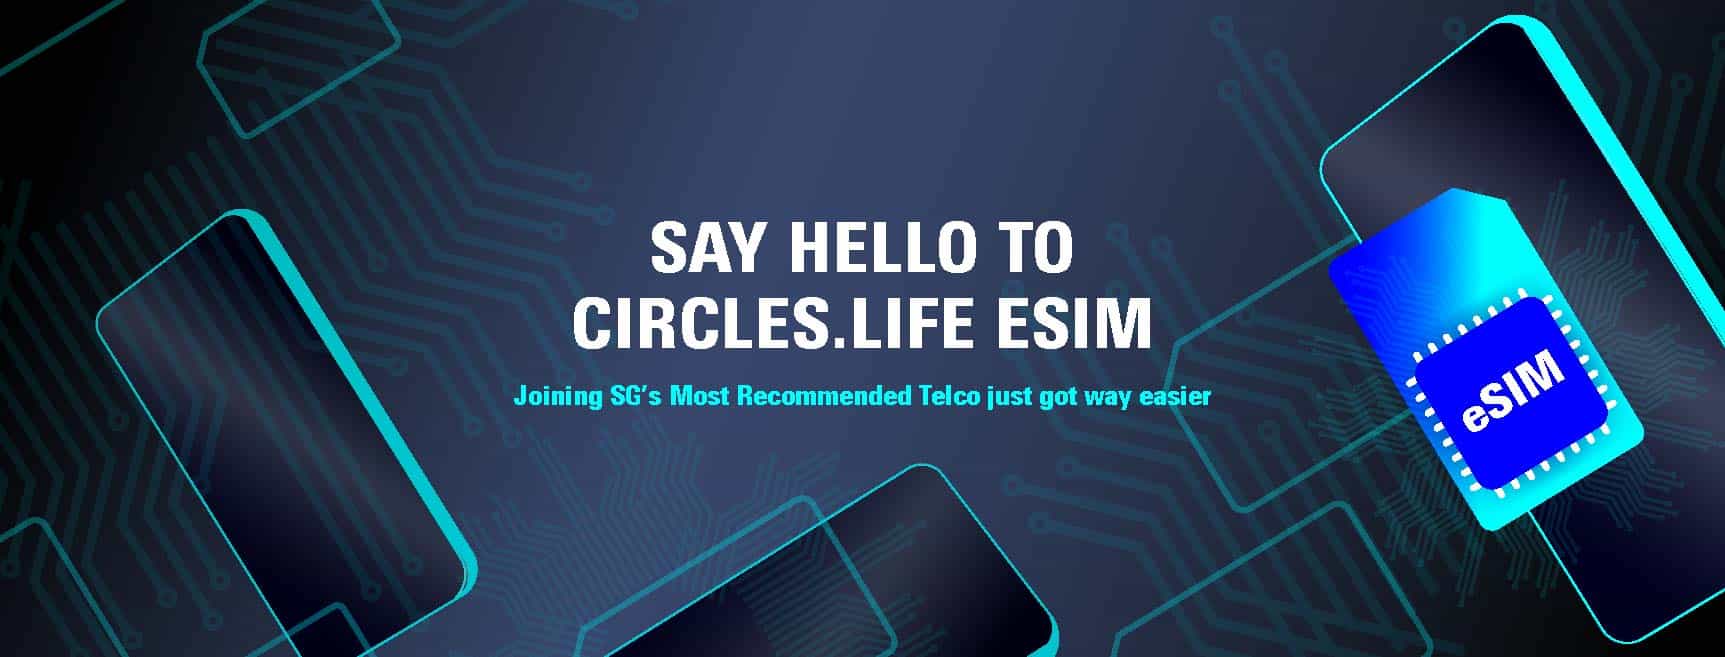 Circles.Life save up to 40% OFF on 30GB, 100GB, 160GB plans